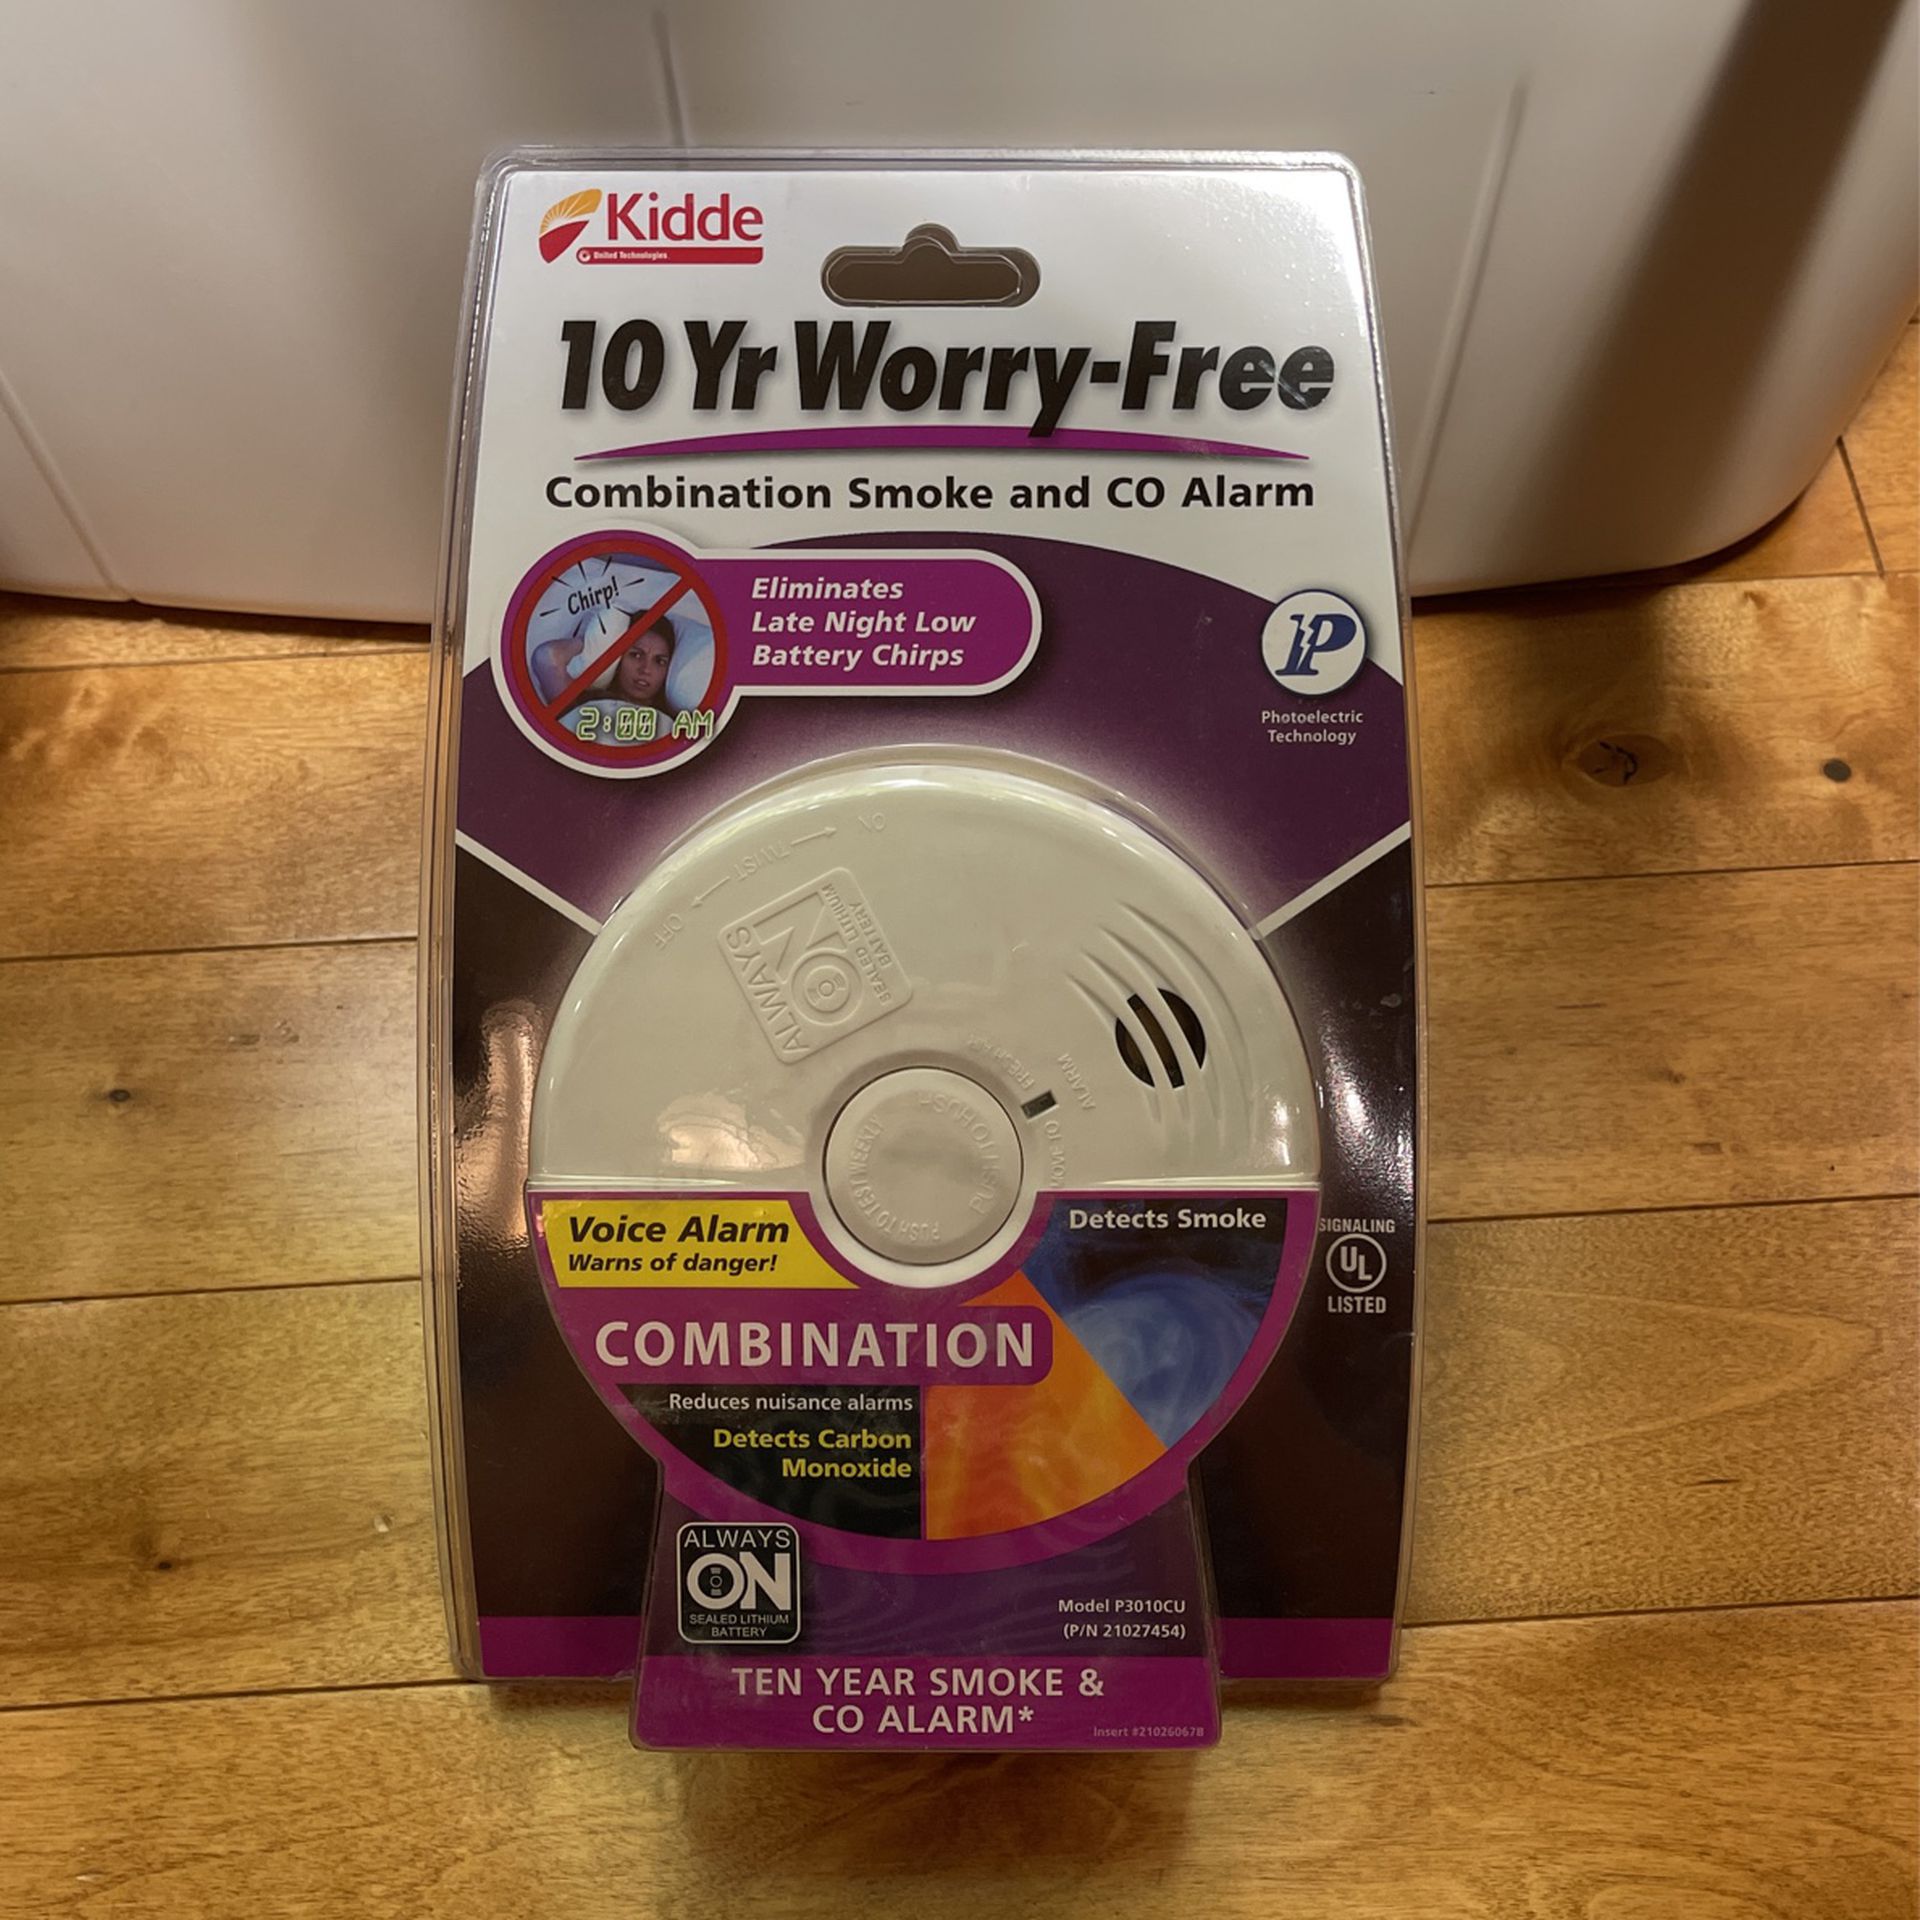 Kidde 10-Year Worry Free Smoke & Carbon Monoxide Detector, Lithium Battery Powered with Photoelectric Sensor and Voice Alarm